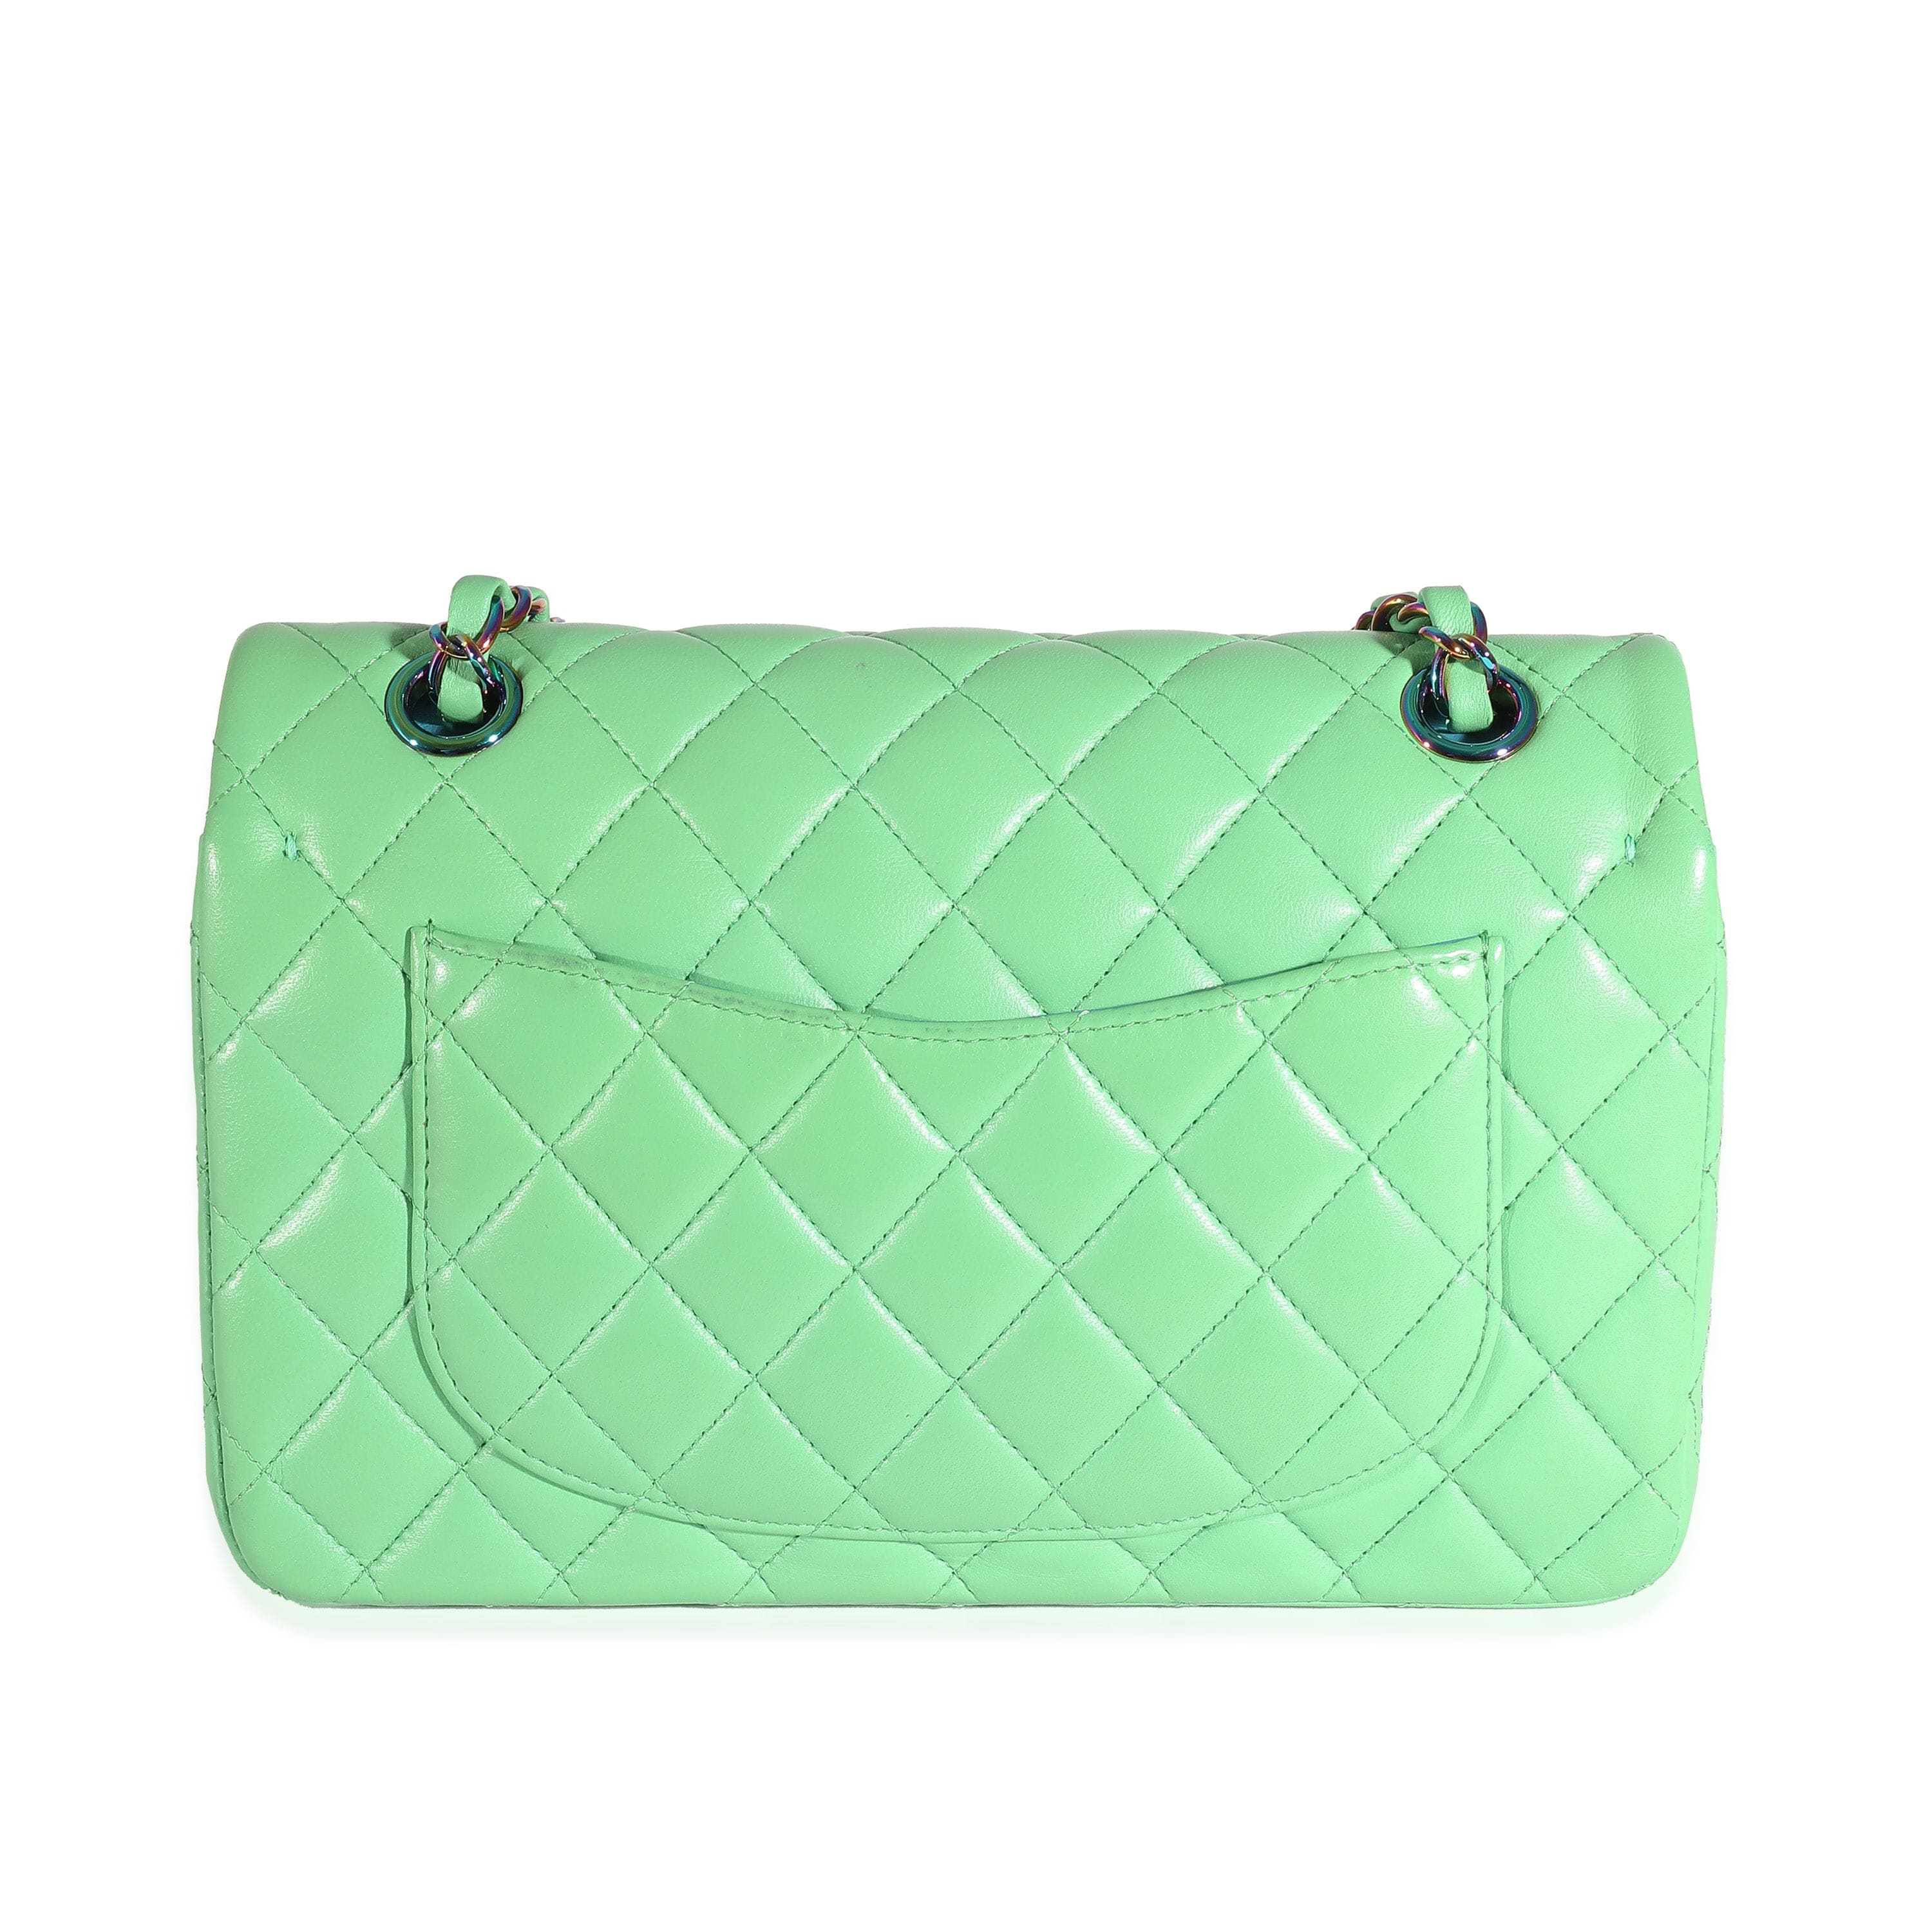 Chanel Chanel Green Quilted Lambskin Rainbow Small Classic Double Flap Bag